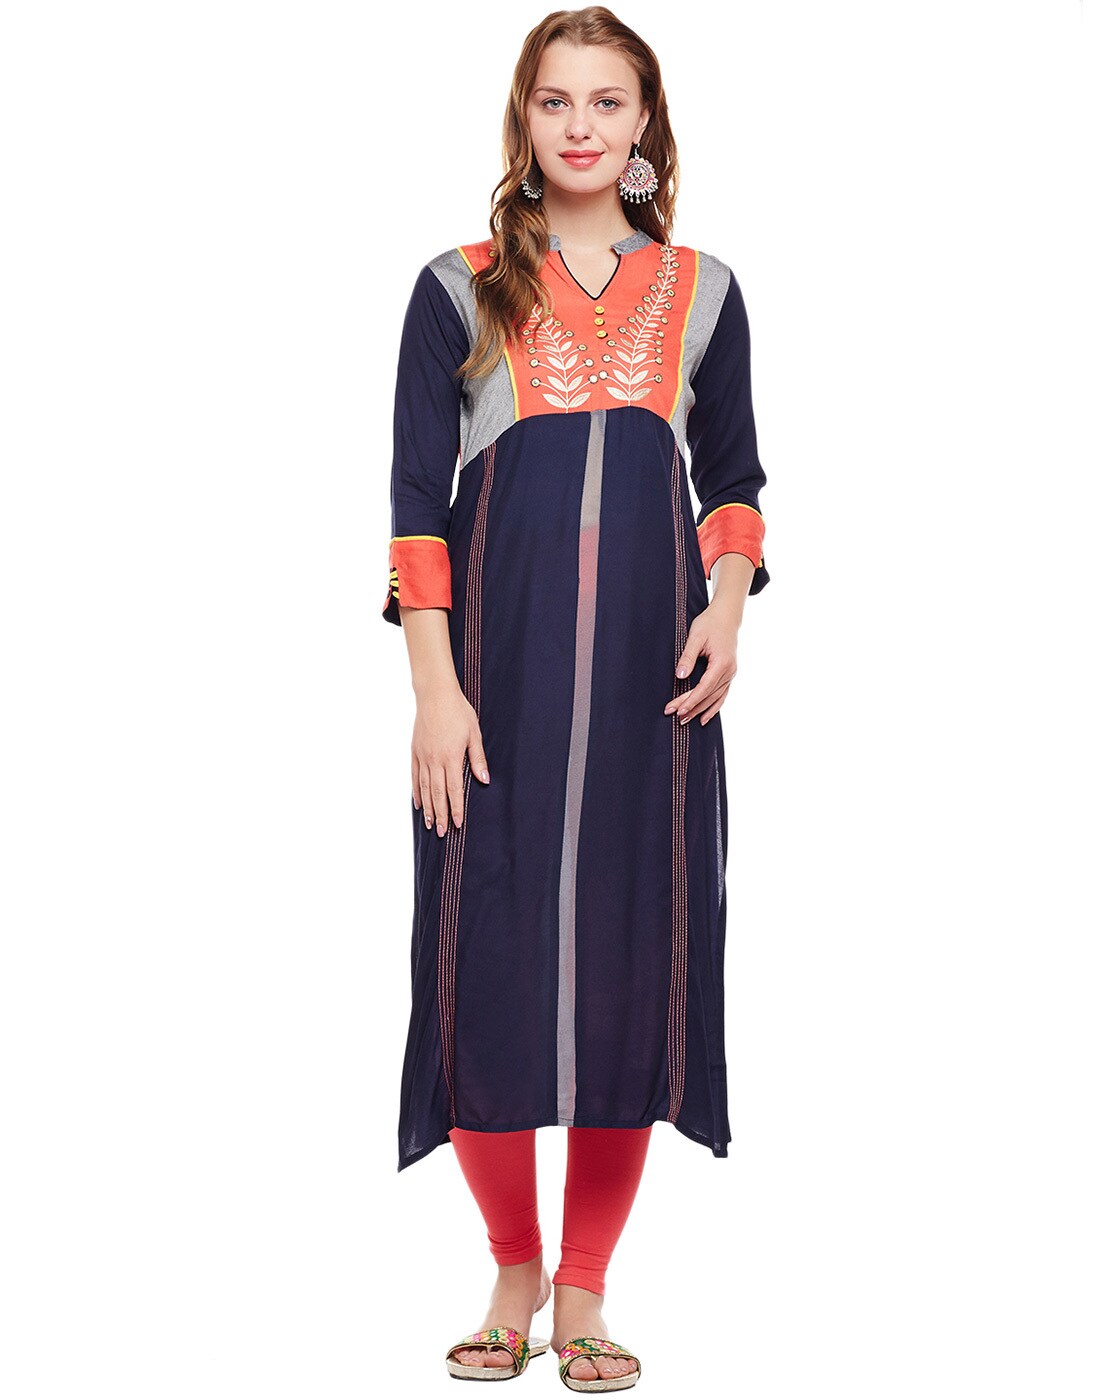 MAUKA  Brown Rayon Womens Straight Kurti  Pack of 1   Buy MAUKA   Brown Rayon Womens Straight Kurti  Pack of 1  Online at Best Prices in  India on Snapdeal